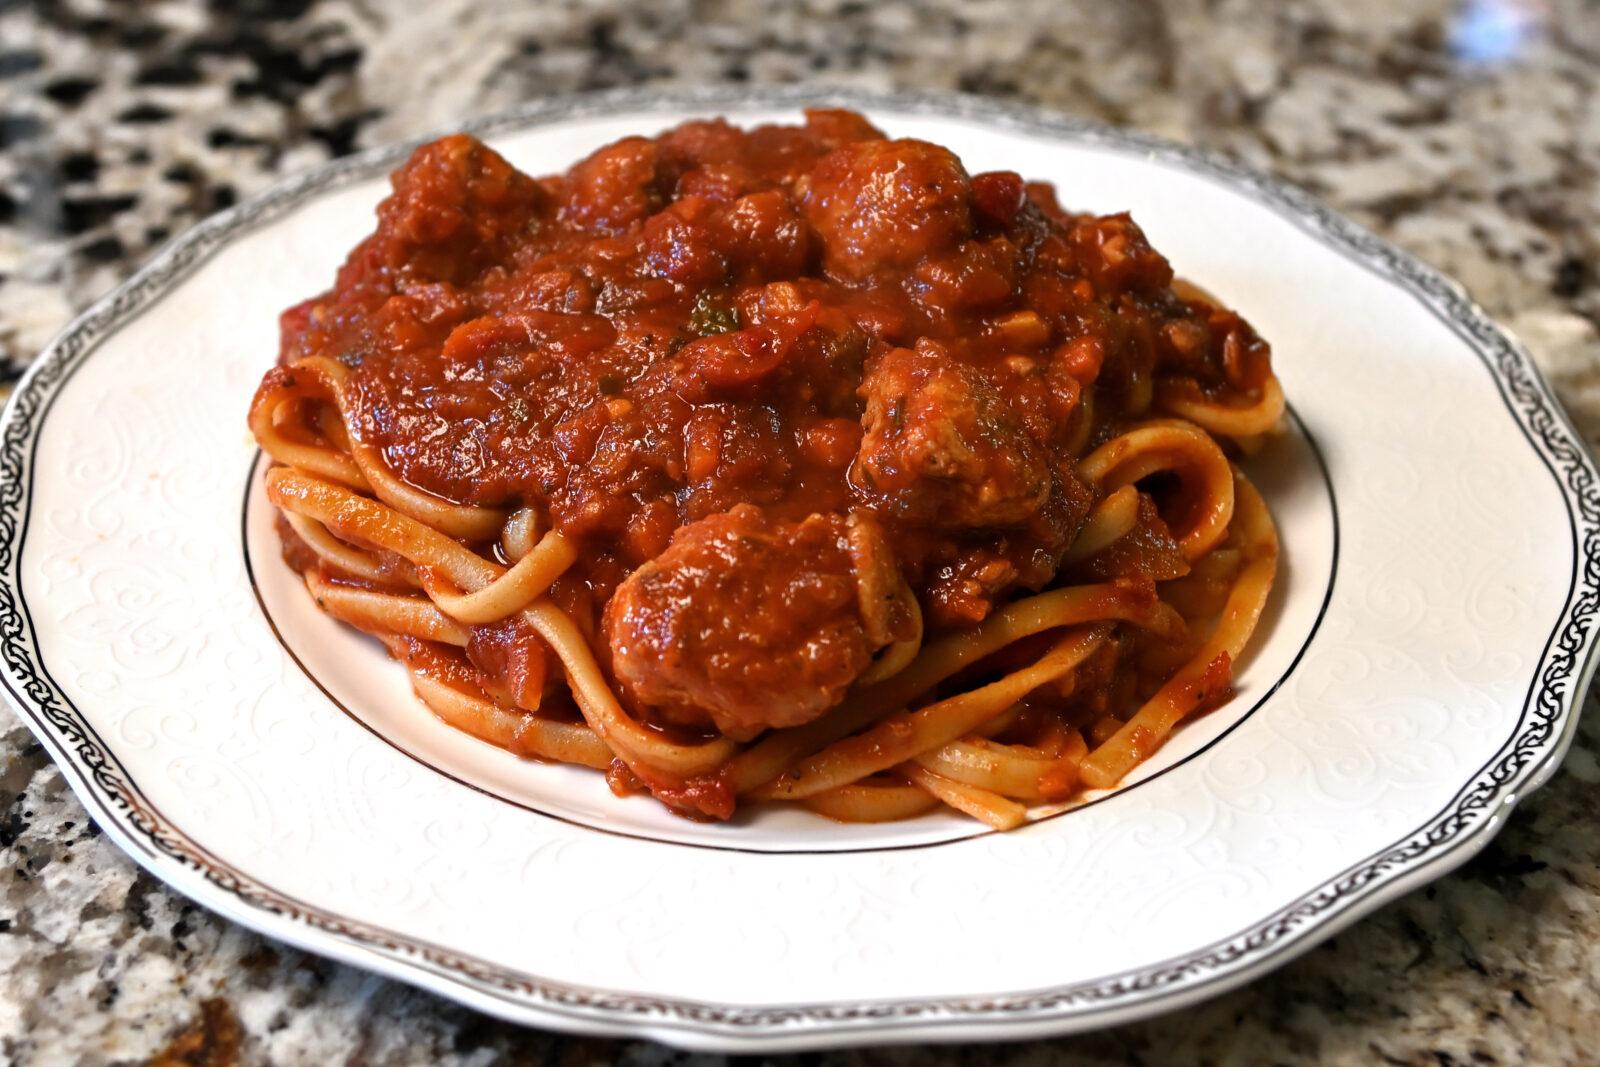 Nanas pasta sauce with meatballs and spaghetti on a plate.